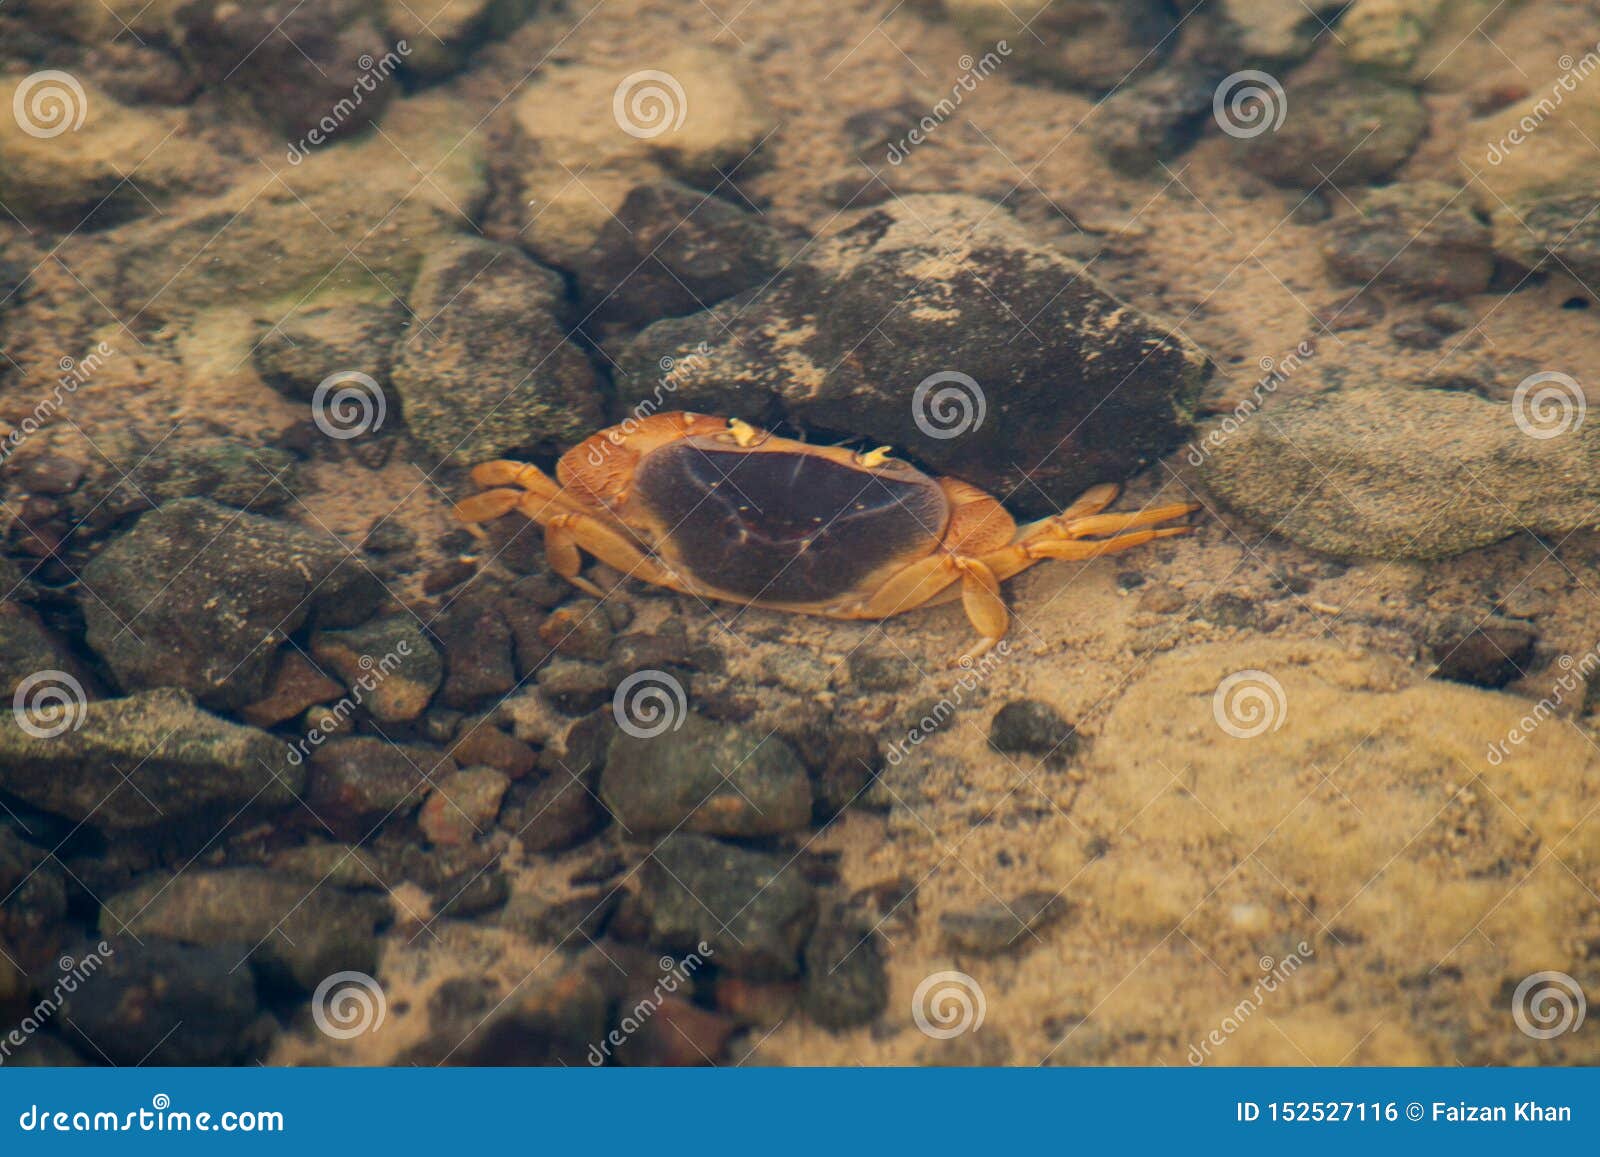 Indian Crab in a Small Pond Stock Photo - Image of indian, water: 152527116